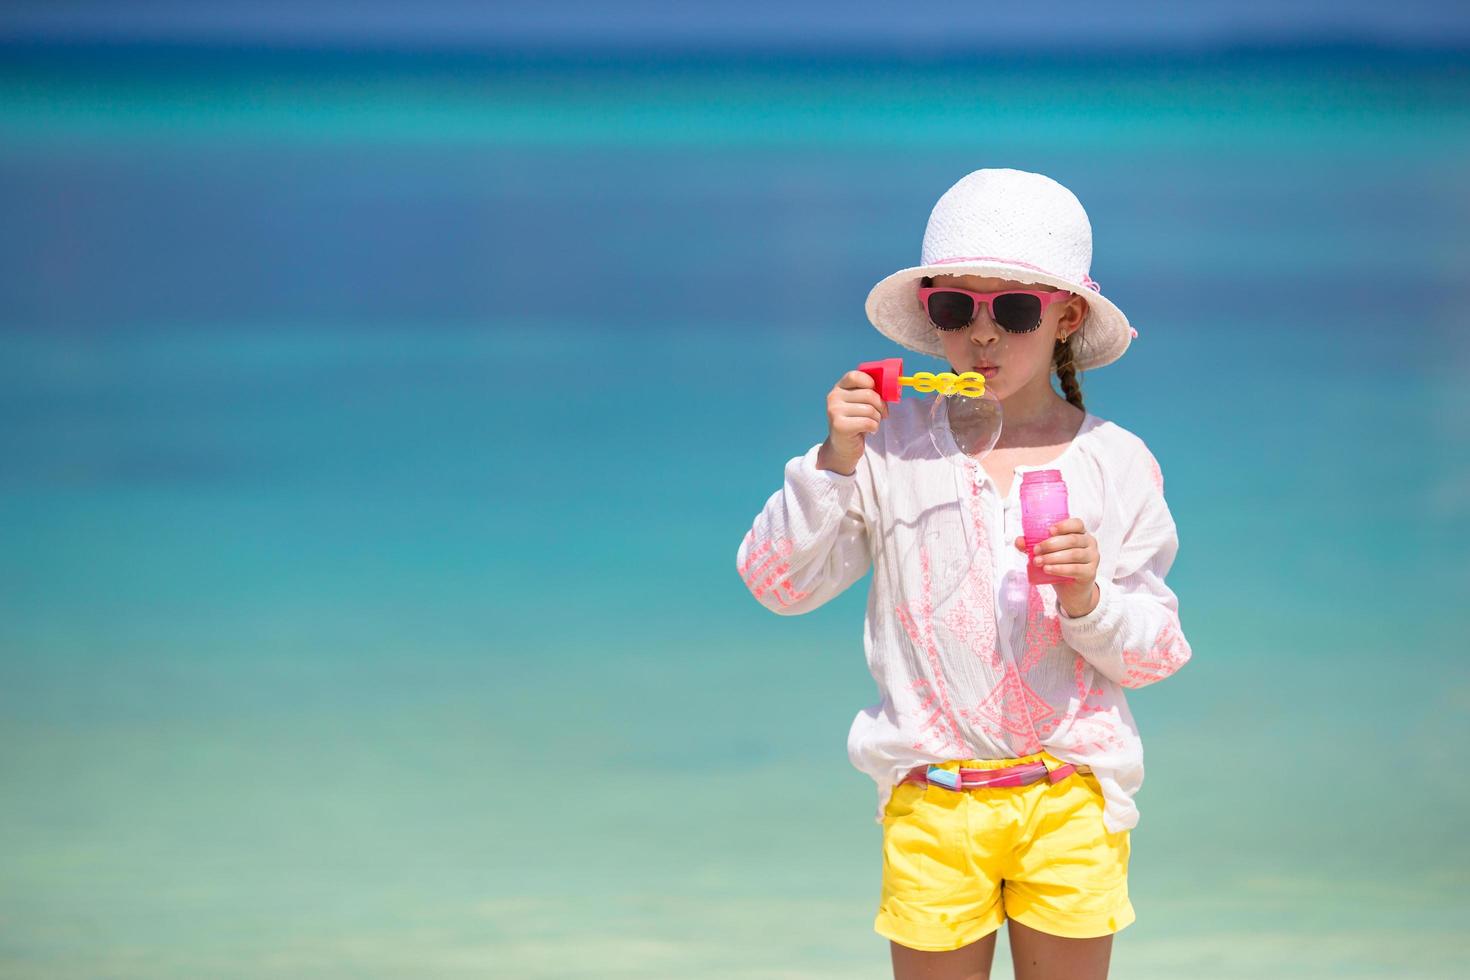 Girl blowing bubbles at a beach photo